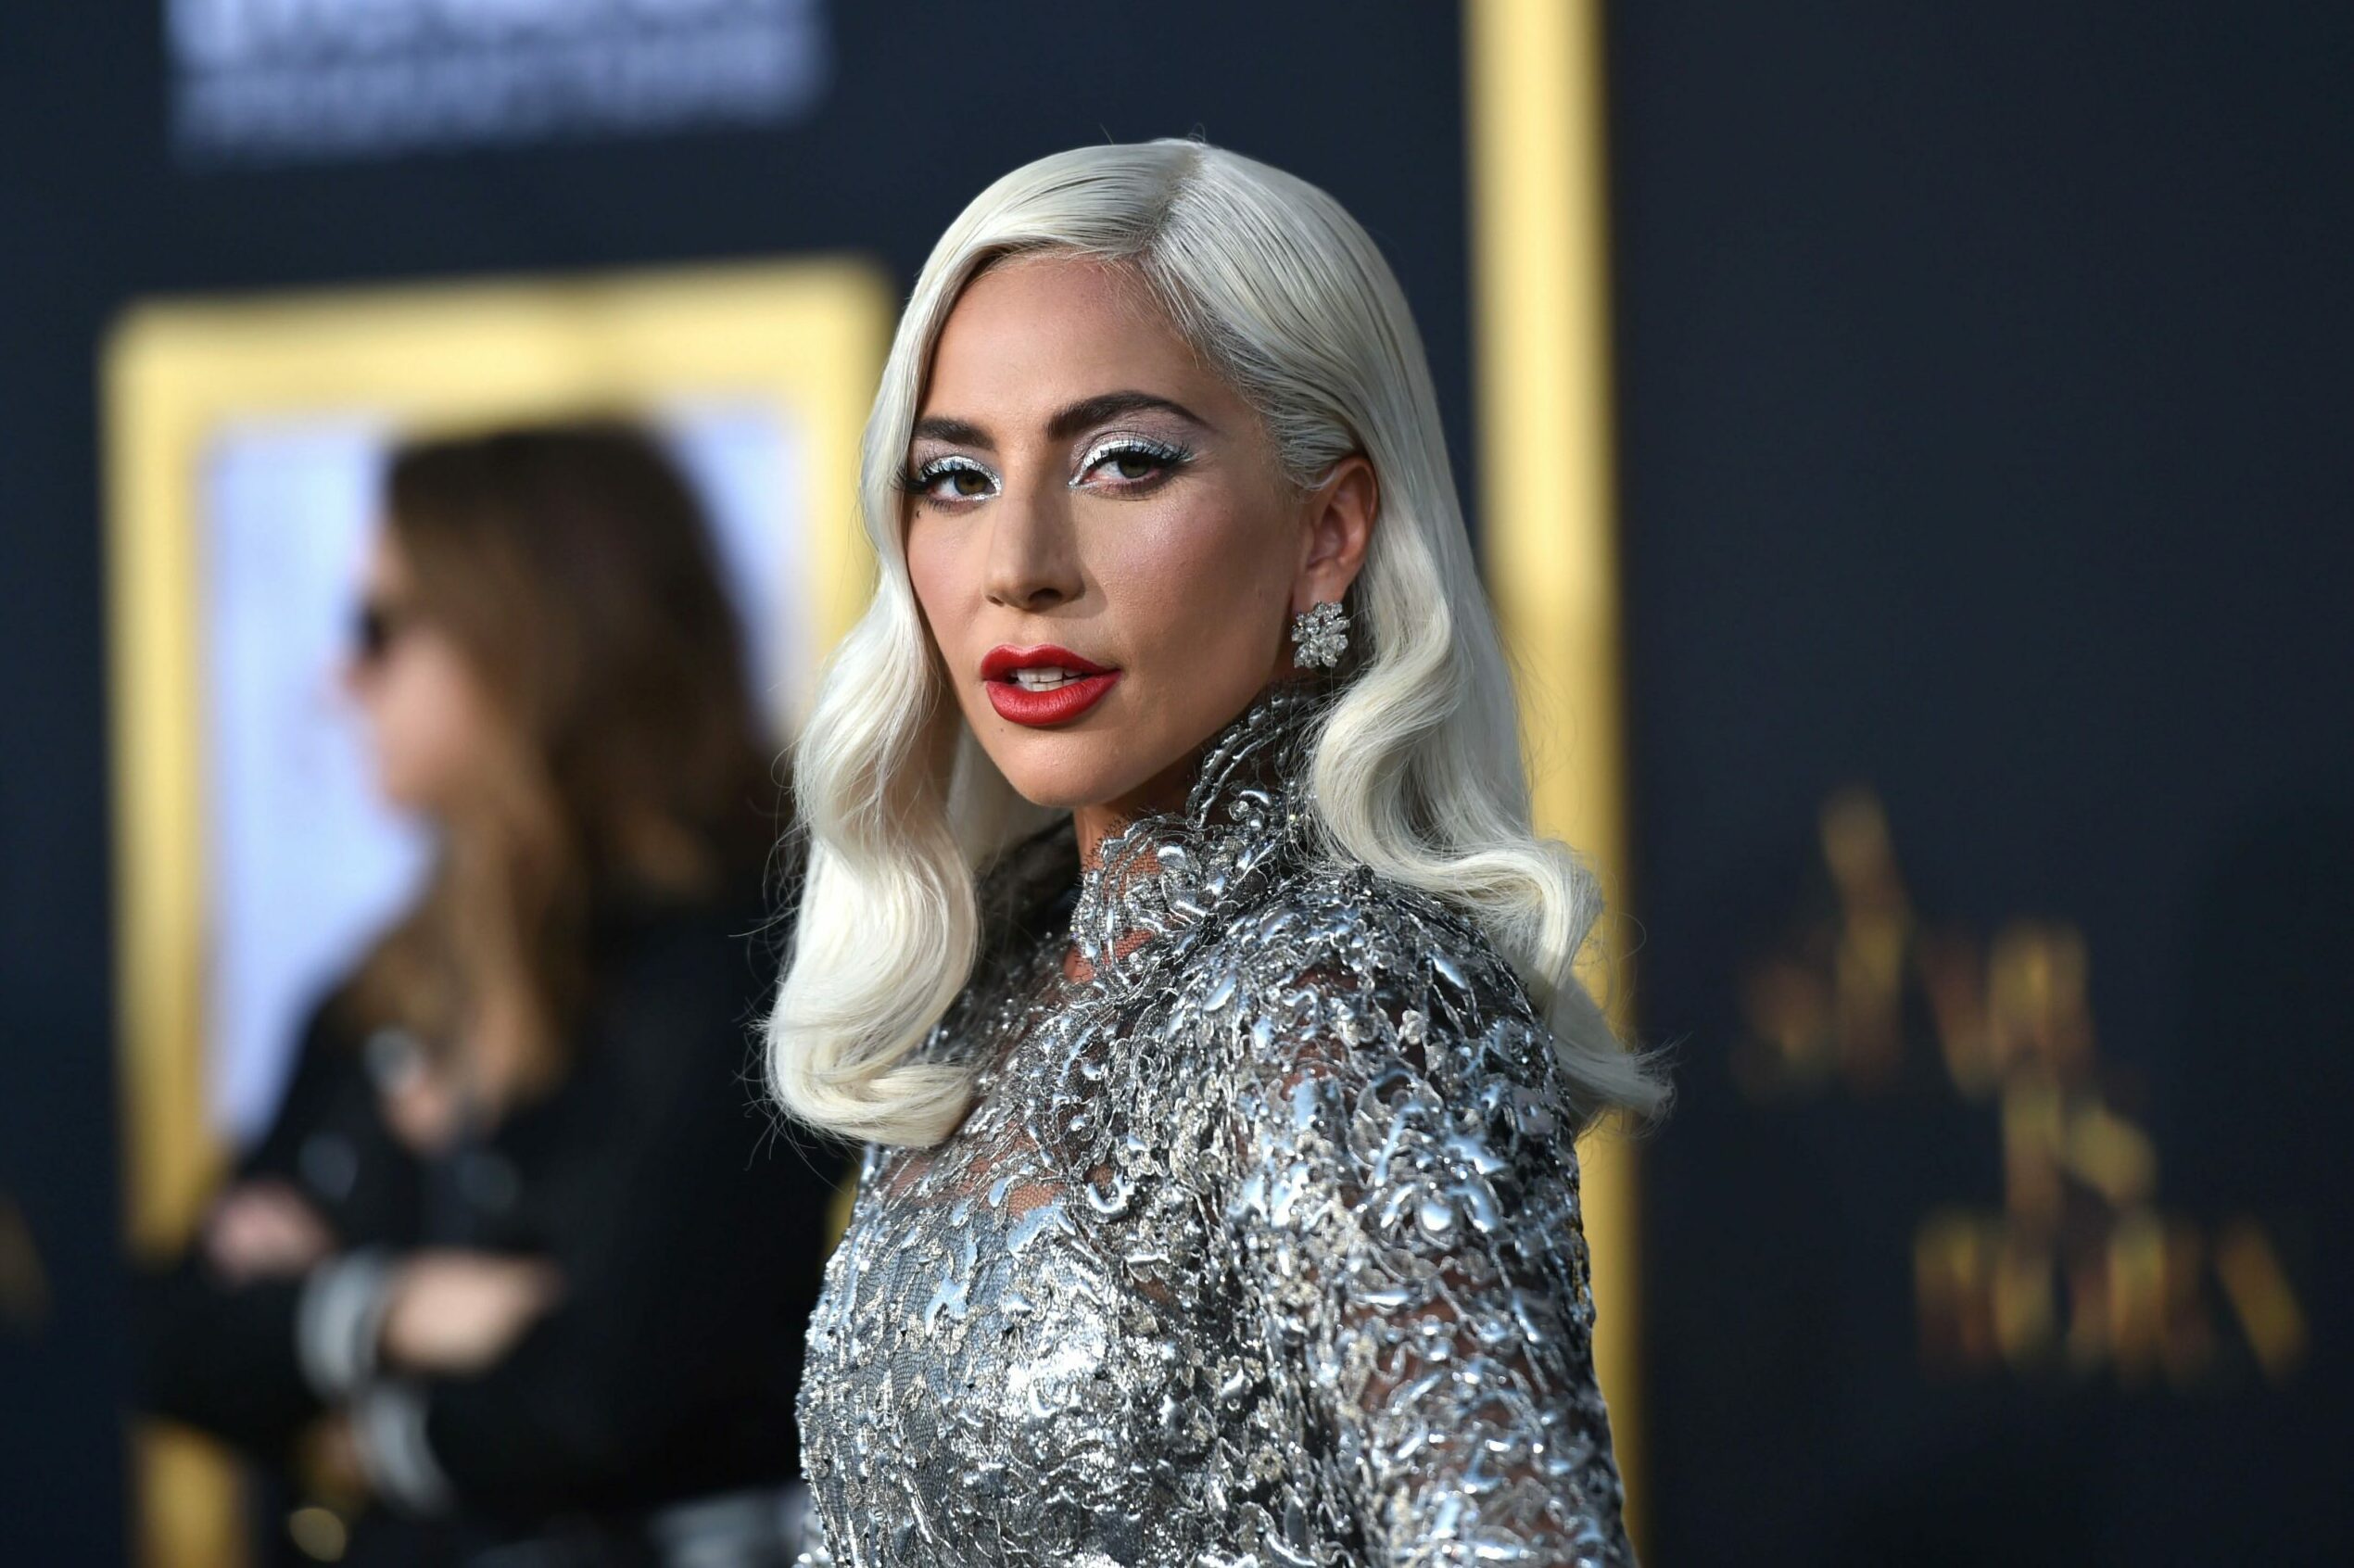 Lady Gaga's rape story is why "The Me You Can't See" is important